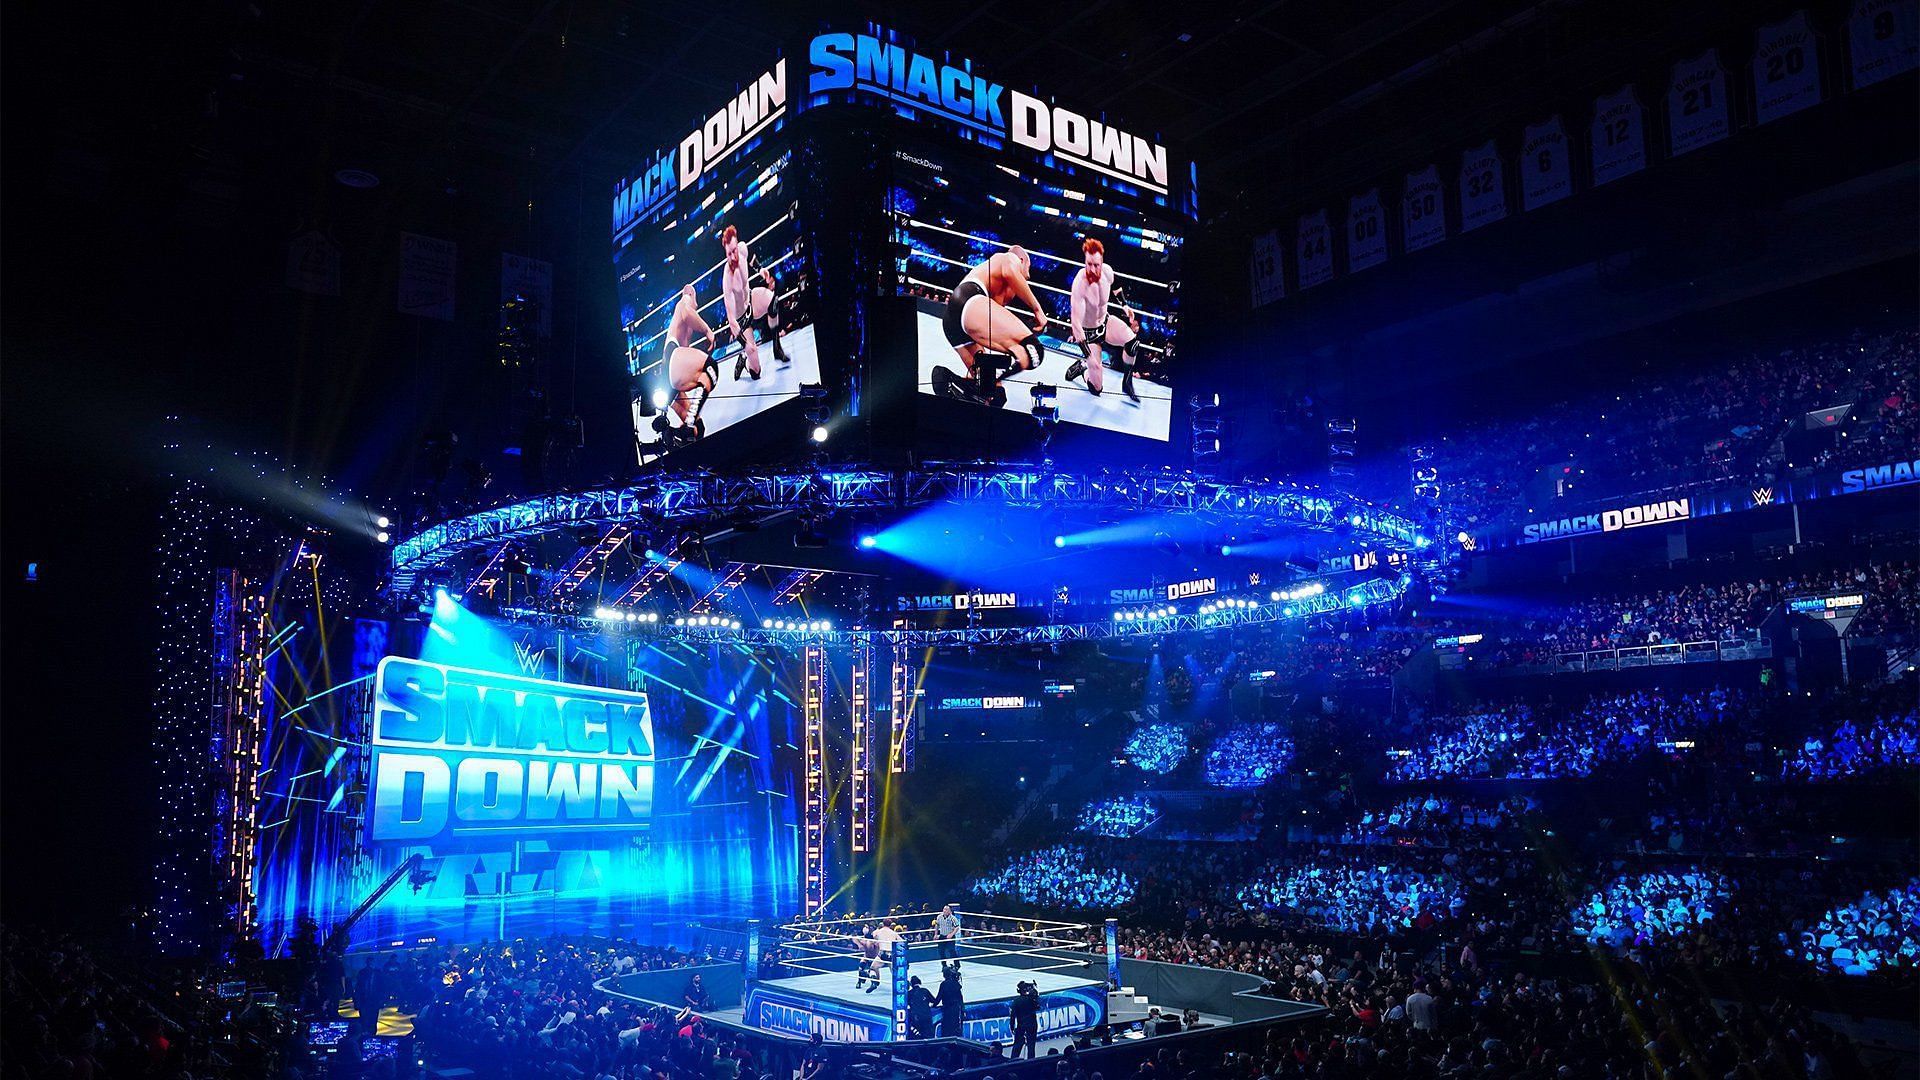 The WWE Universe packs their local arena for a live SmackDown episode